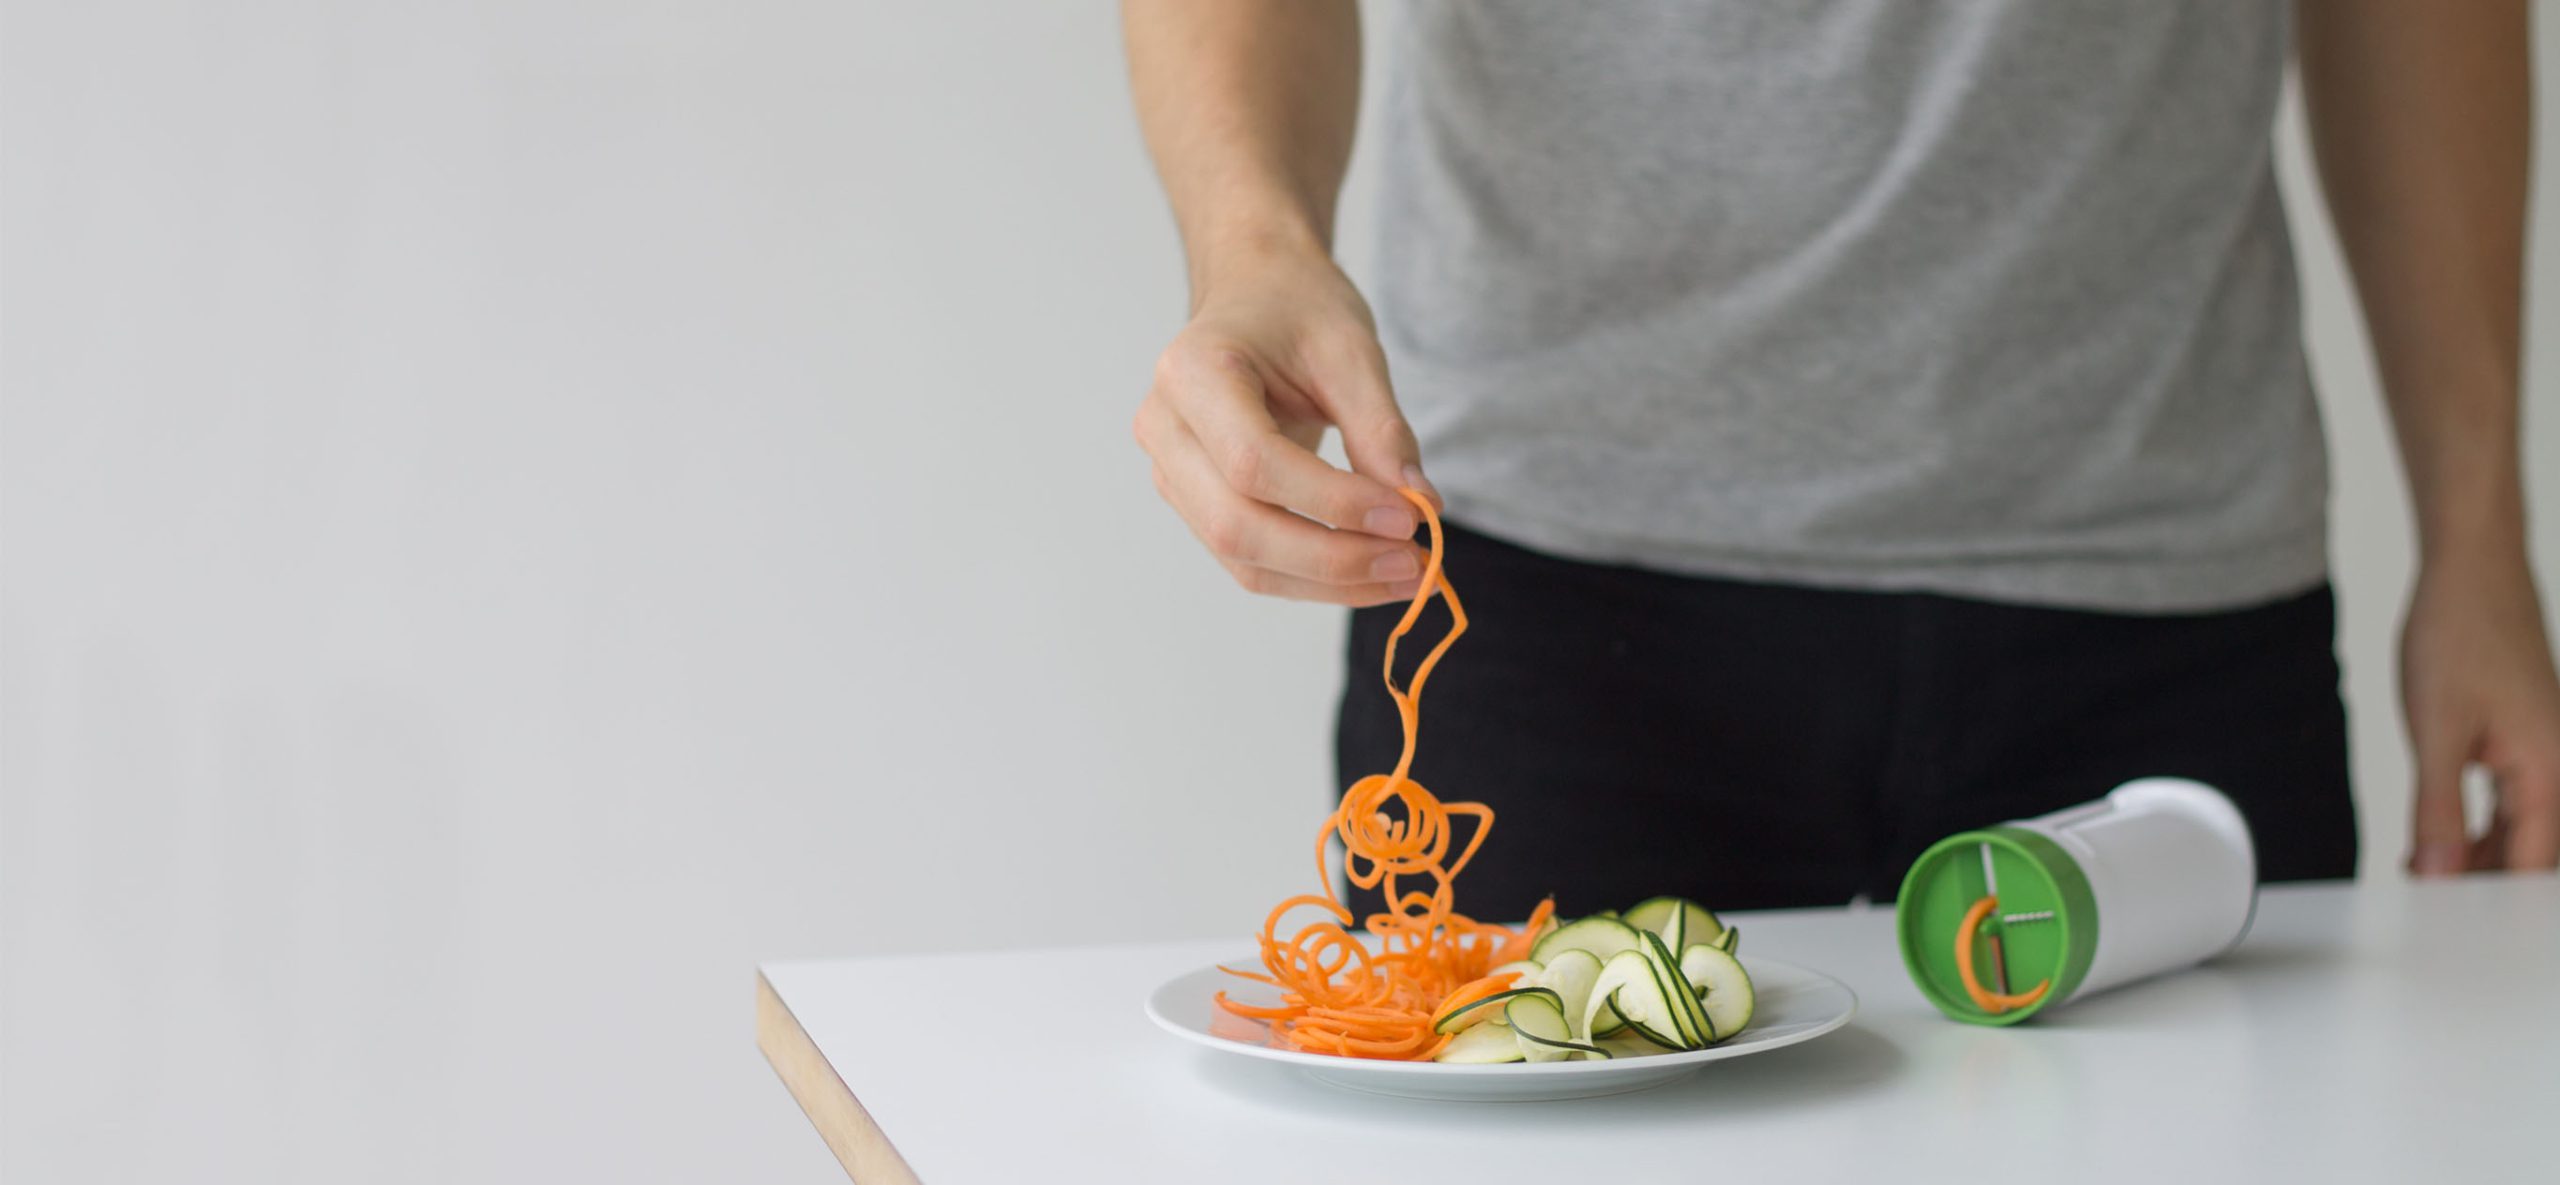 man picking up spiralised food from a plate